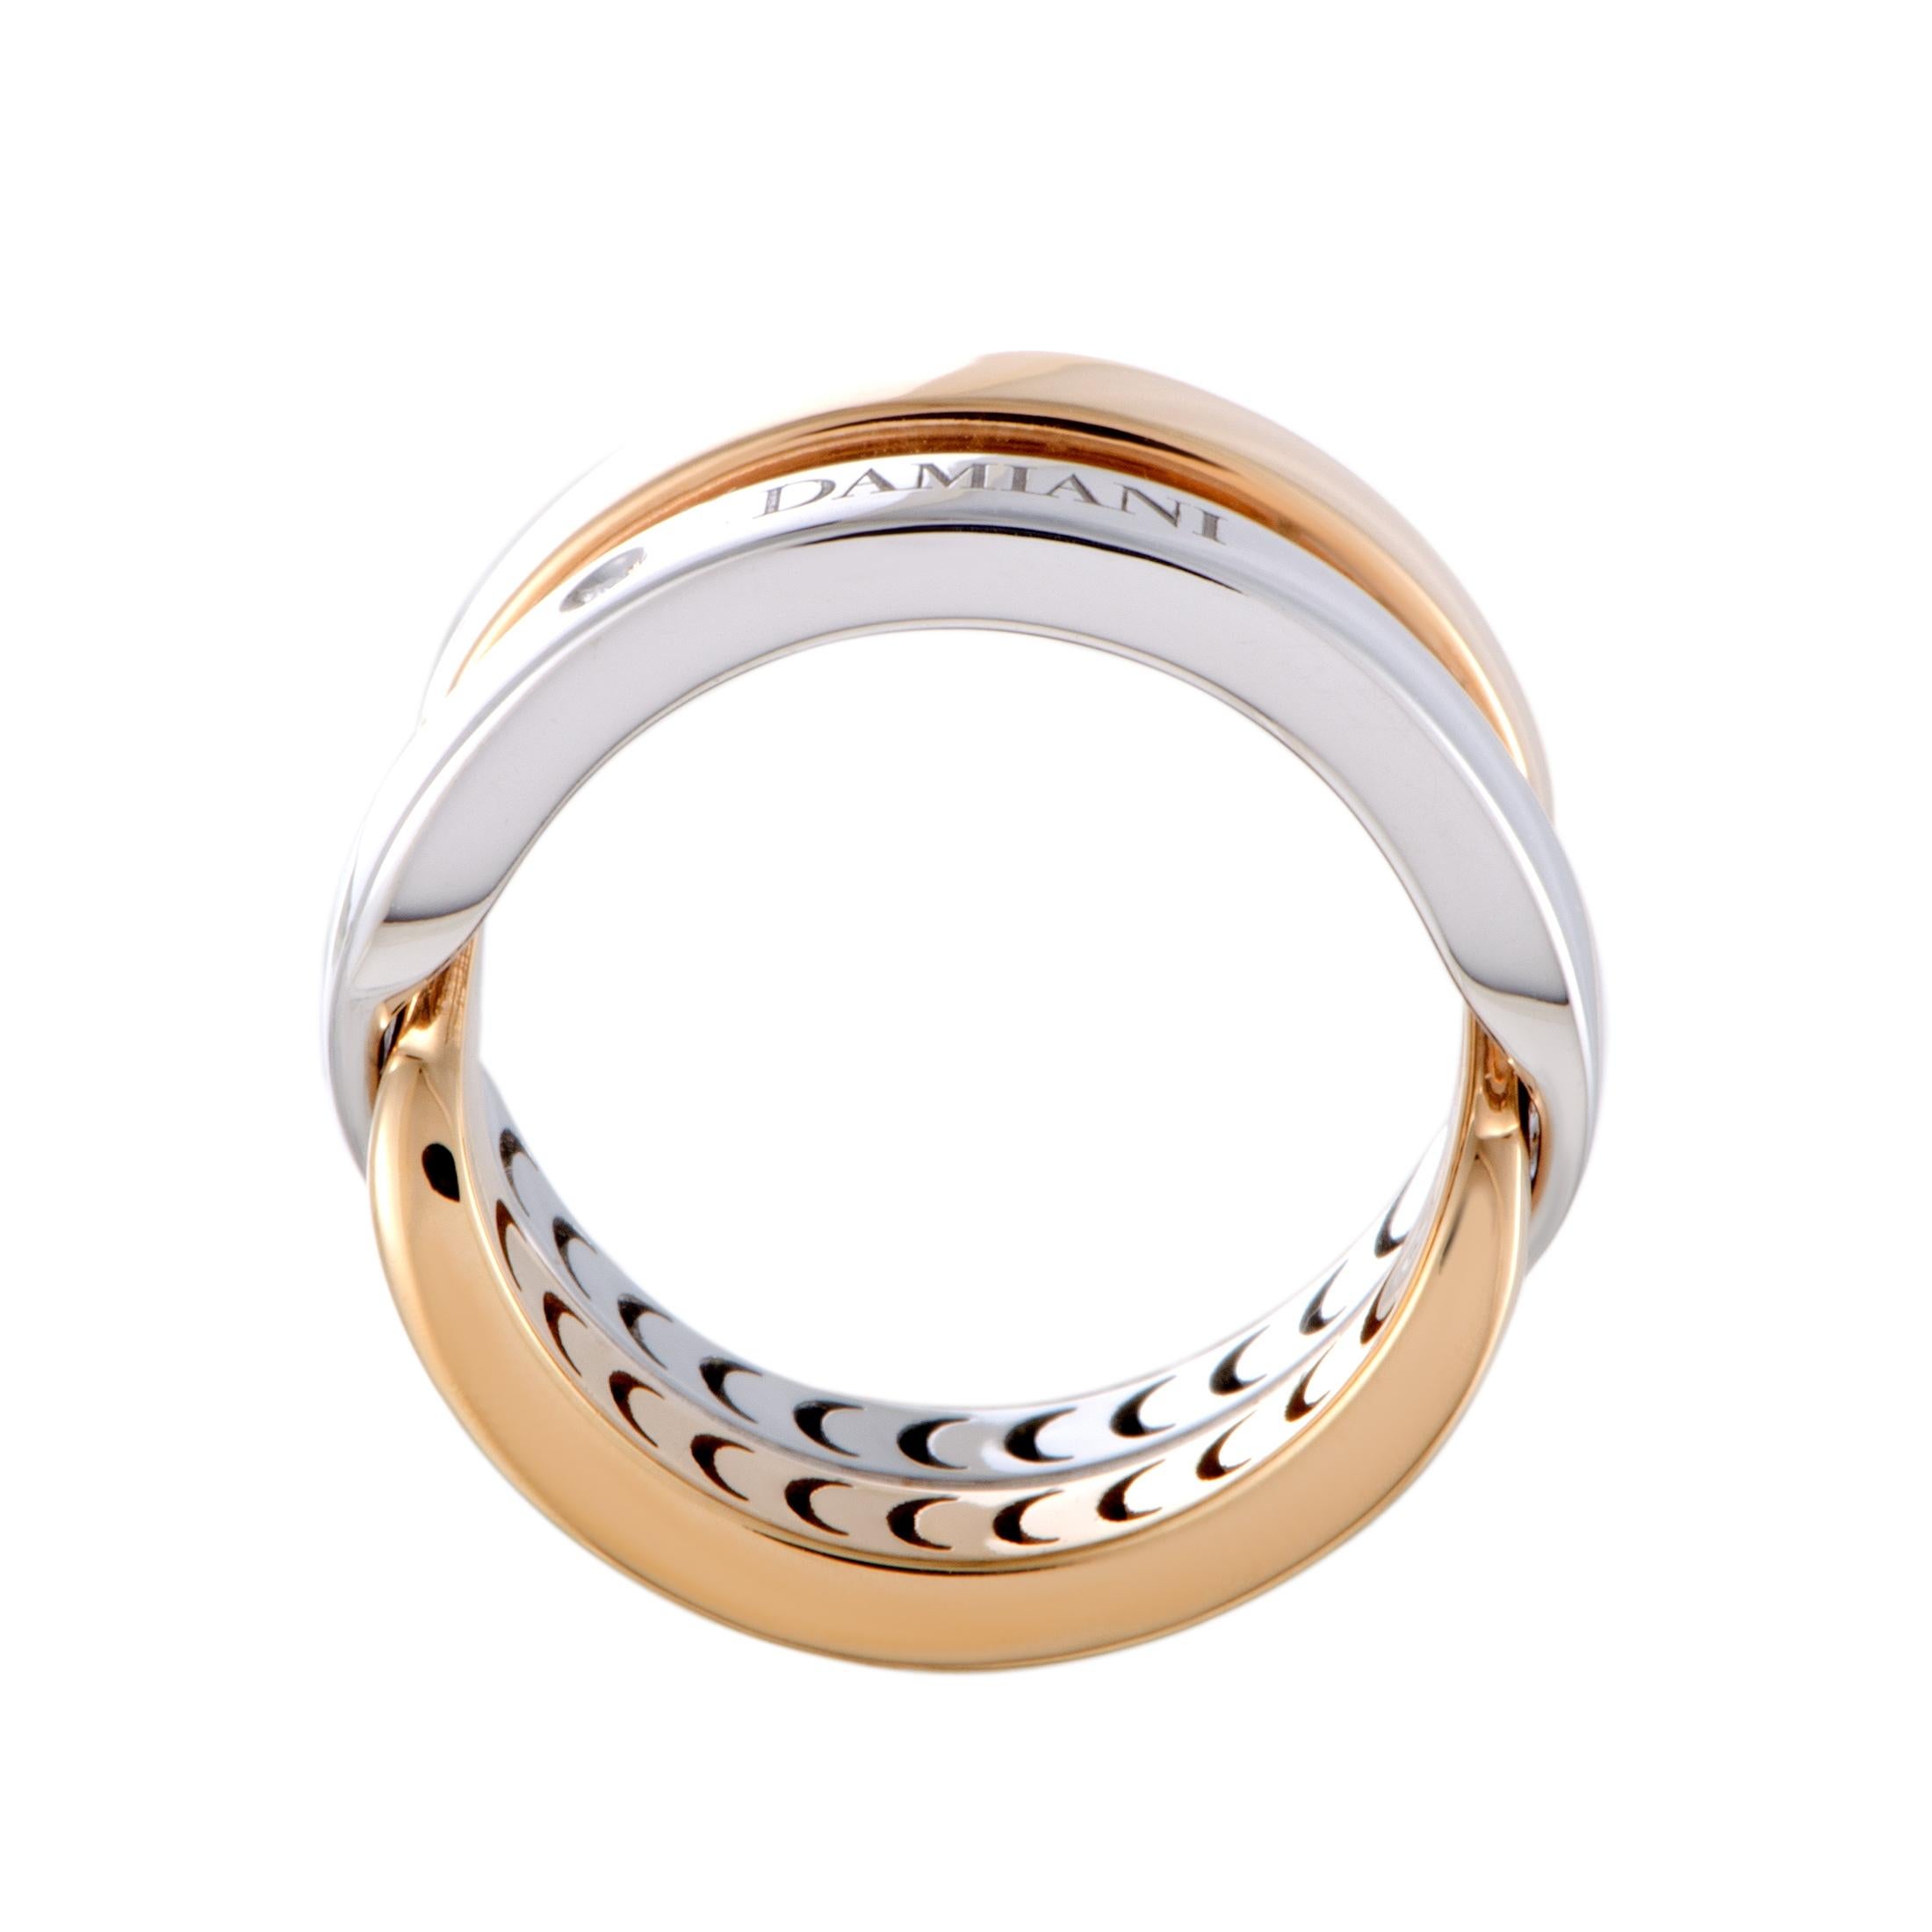 A splendidly prestigious design is beautifully presented in a stunningly luxurious blend of white and rose gold in this exceptional ring that boasts an incredibly elegant appeal. The ring is created by Damiani and it is embellished with an